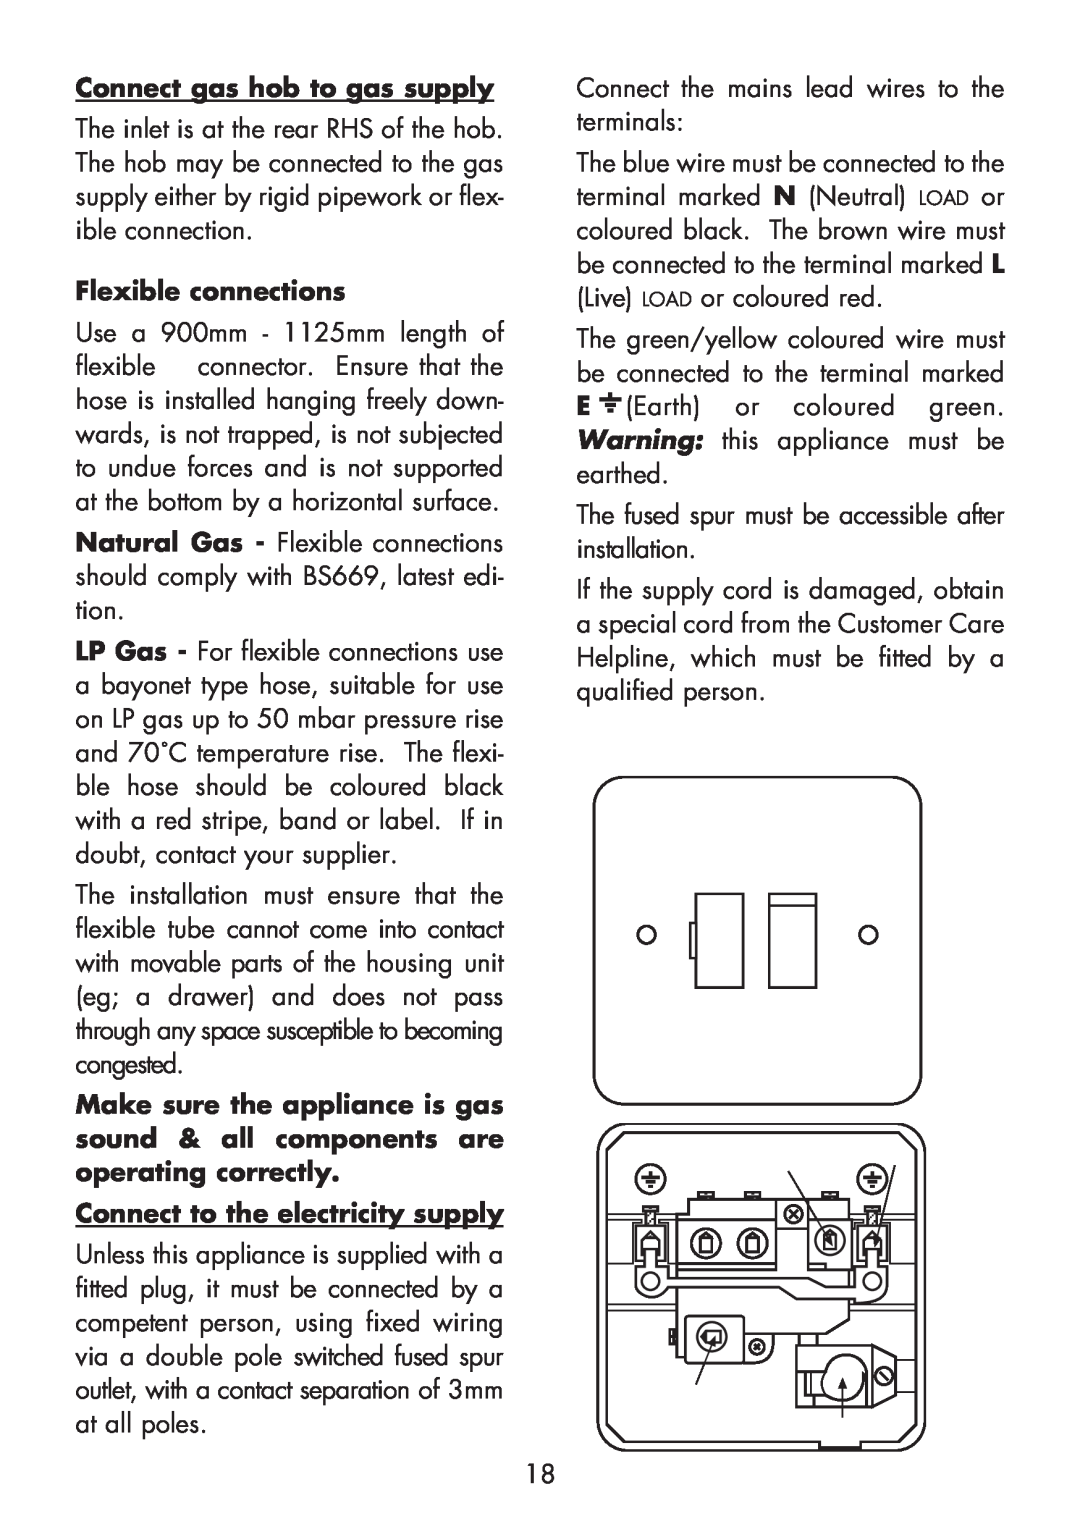 Glen Dimplex Home Appliances Ltd 70T, 60T installation instructions Connect gas hob to gas supply, Flexible connections 